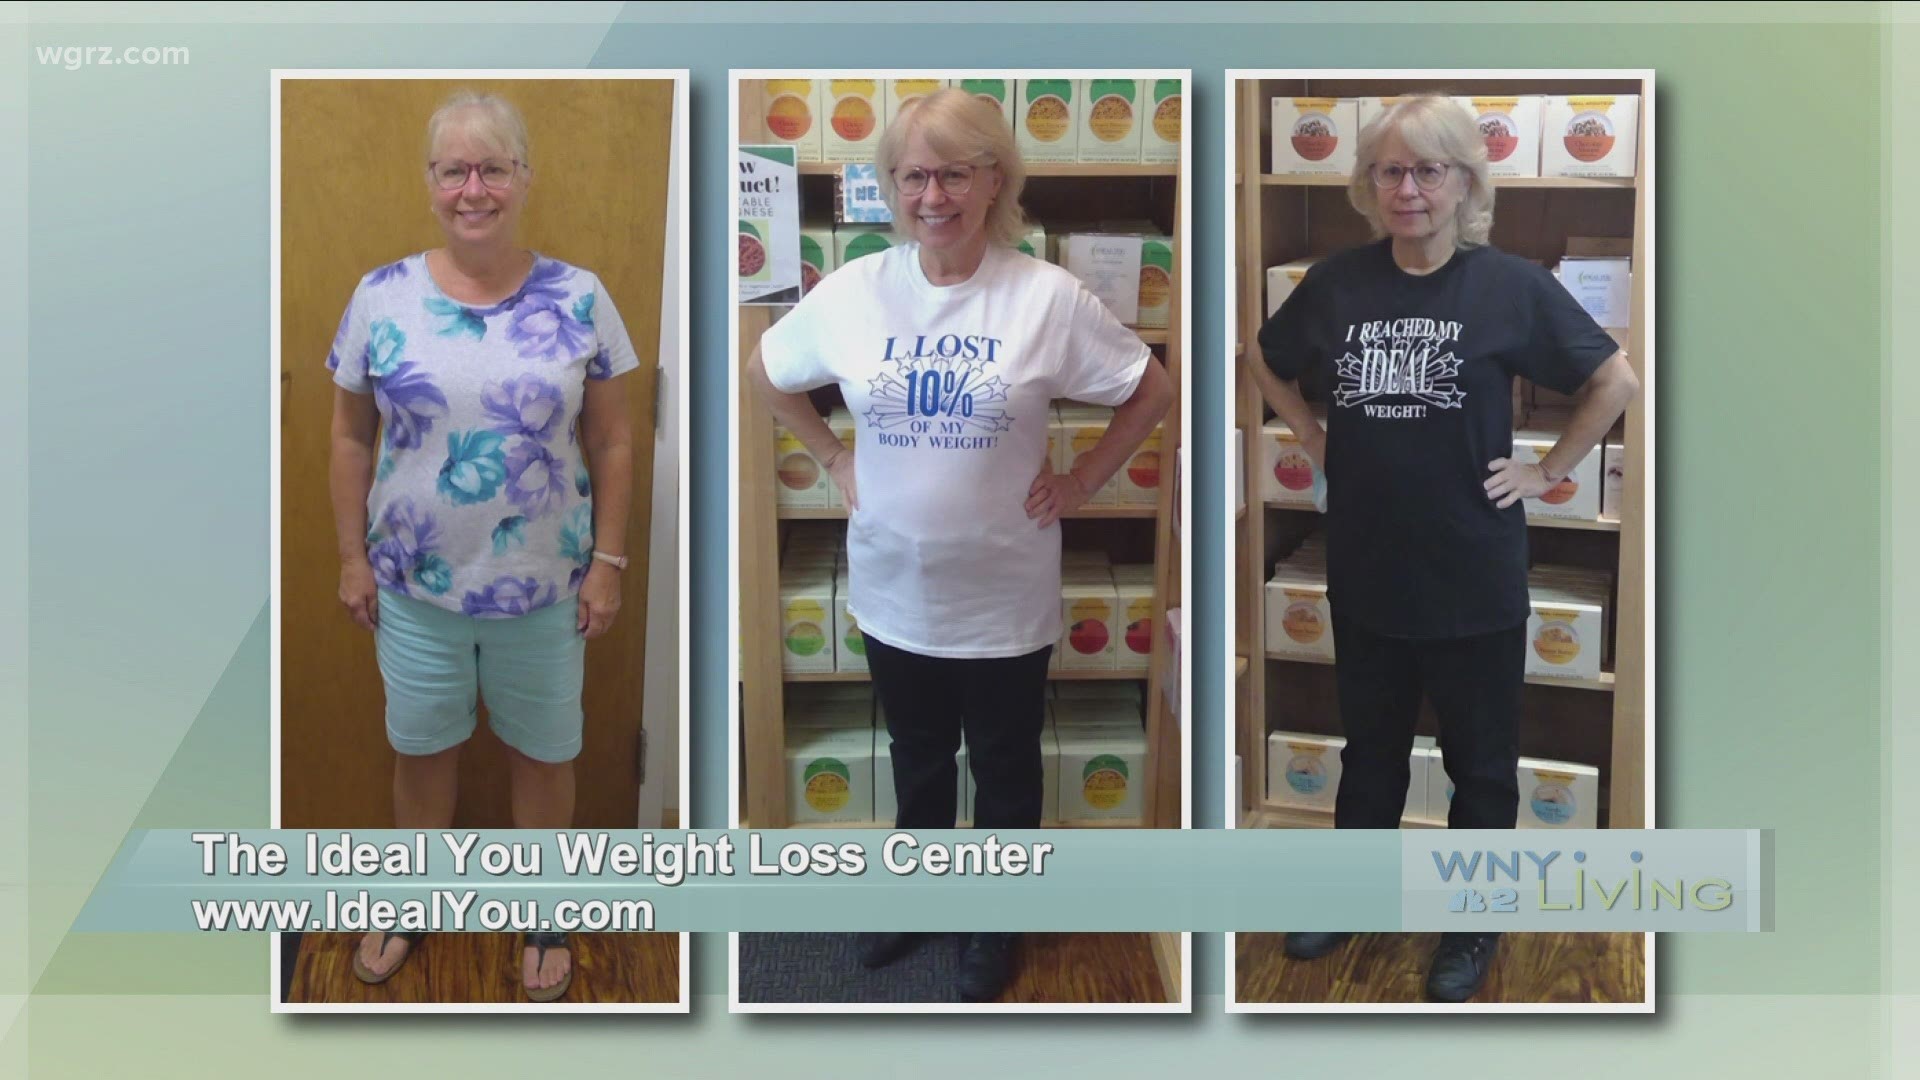 WNY Living - February 13 - The Ideal You Weight Loss Center (THIS VIDEO IS SPONSORED BY THE IDEAL YOU WEIGHT LOSS CENTER)